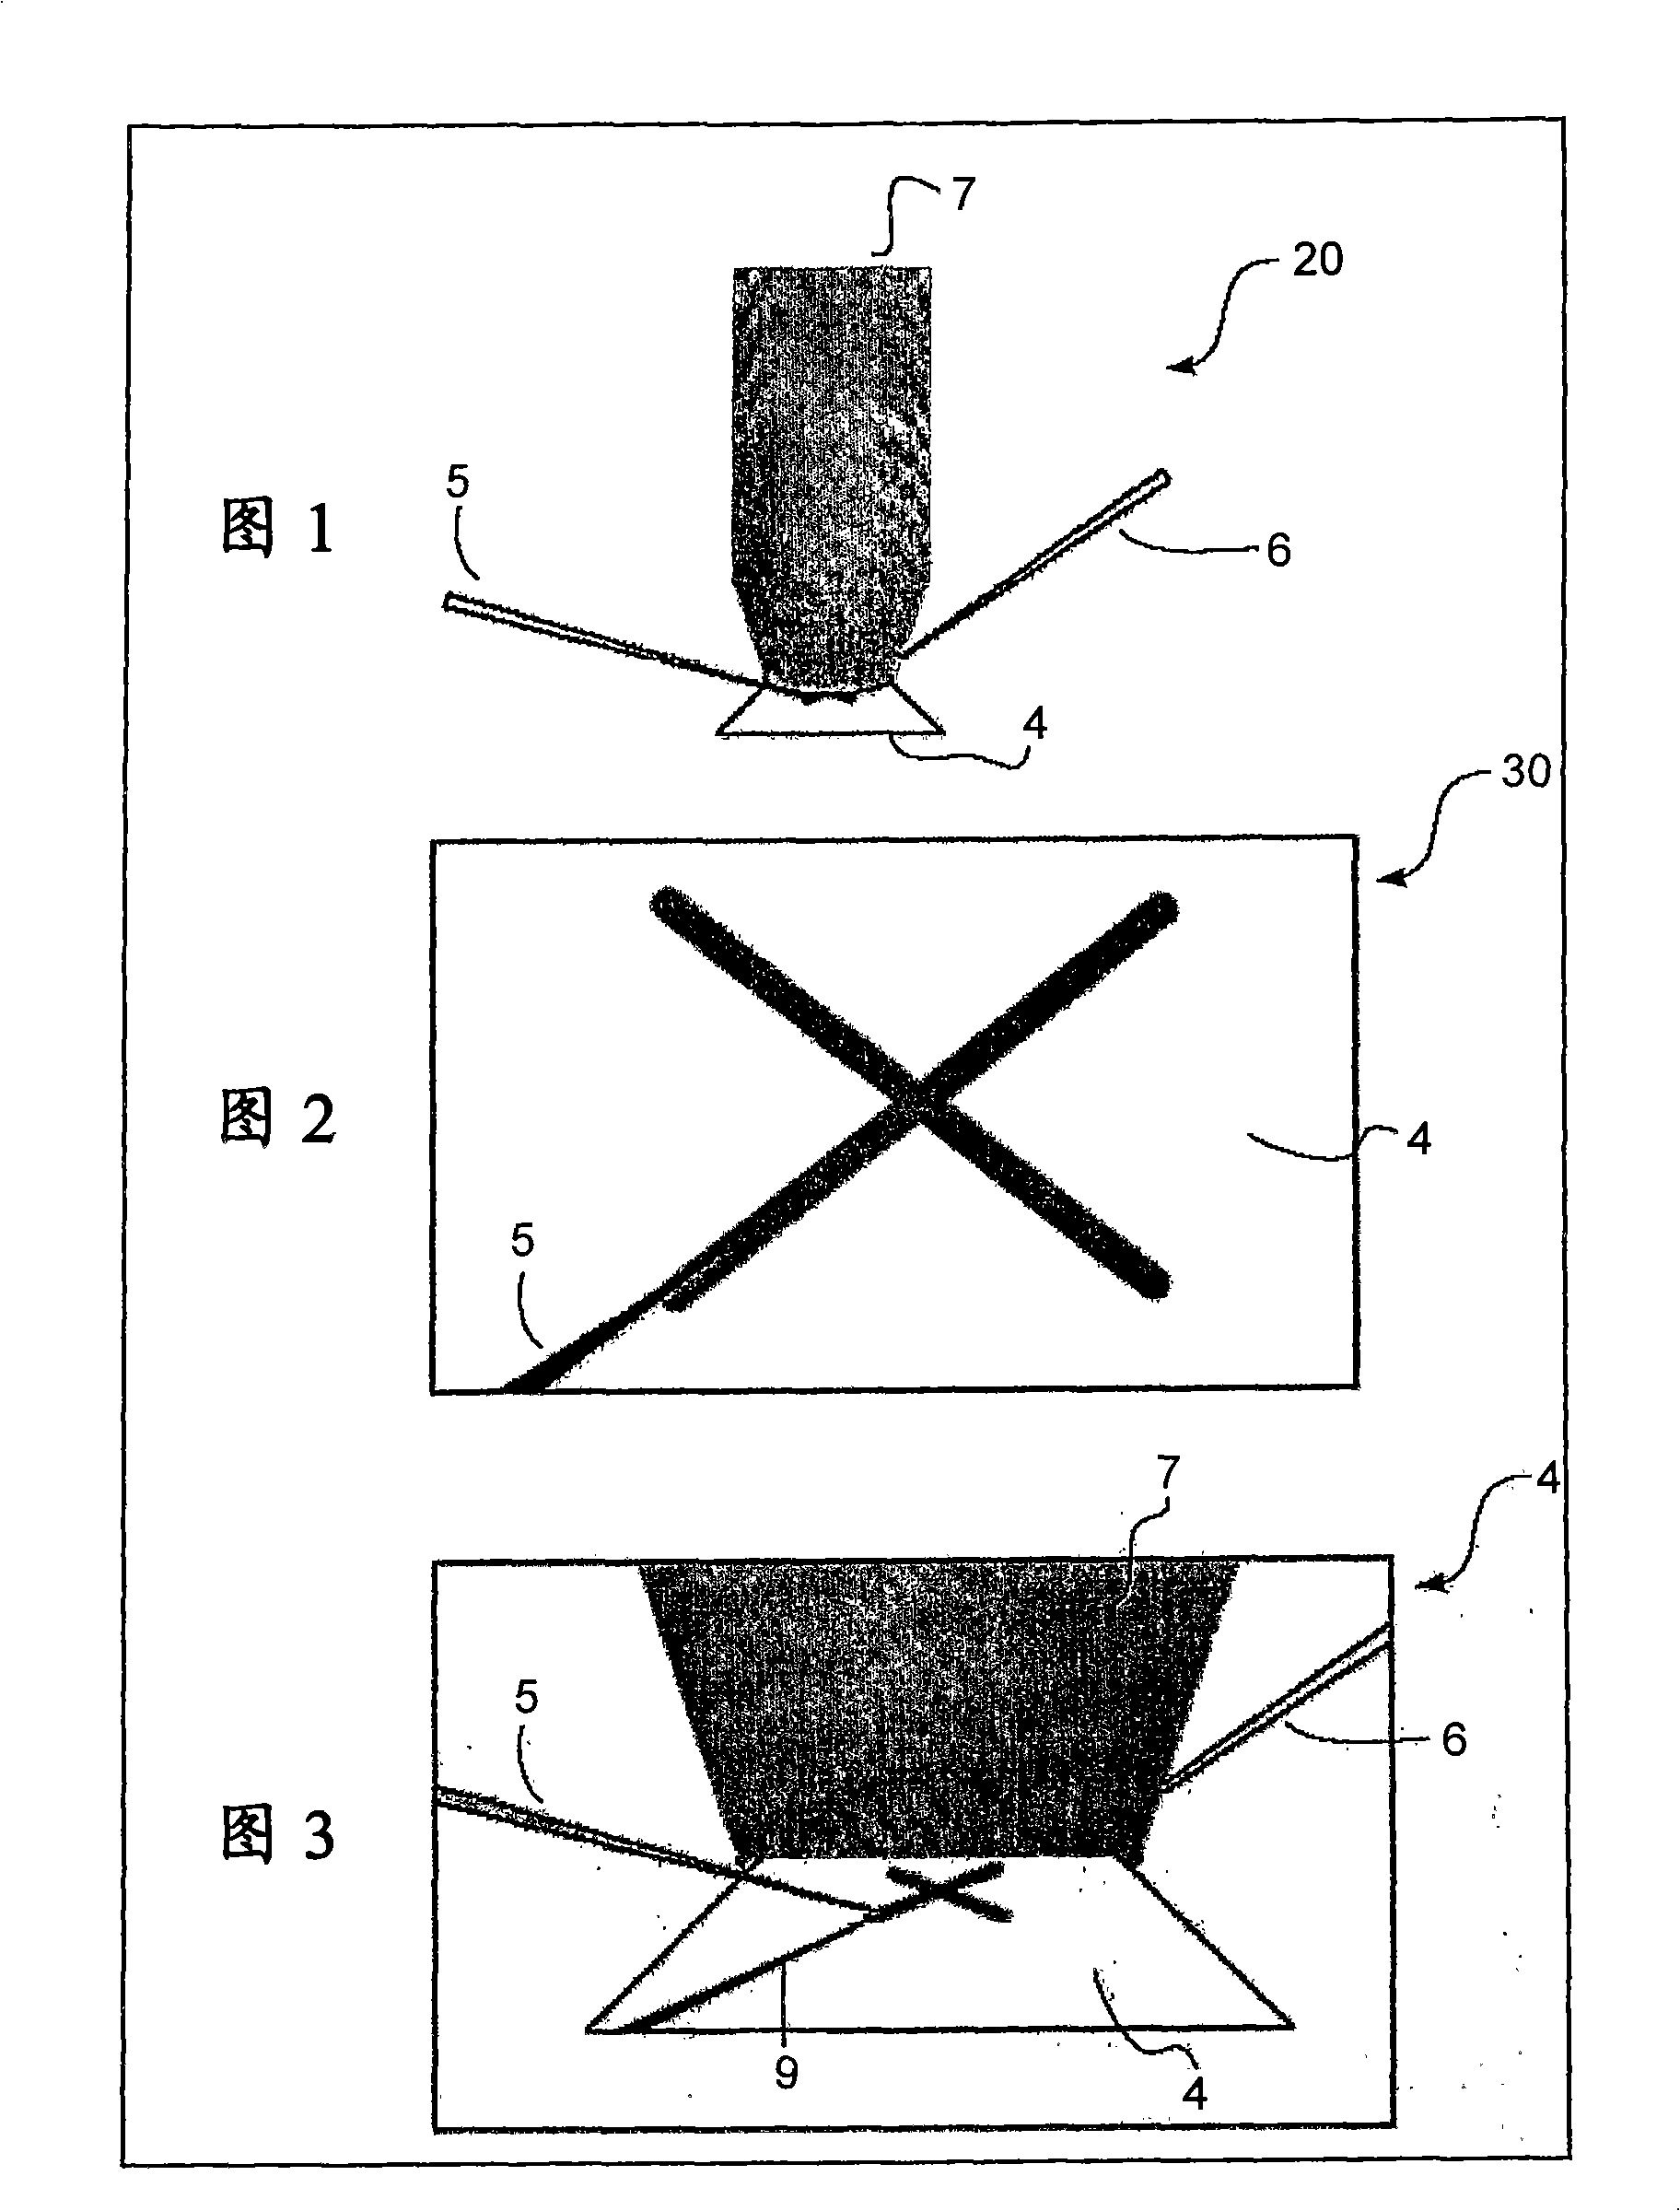 Method and system for acquiring multiple views of real-time video output object